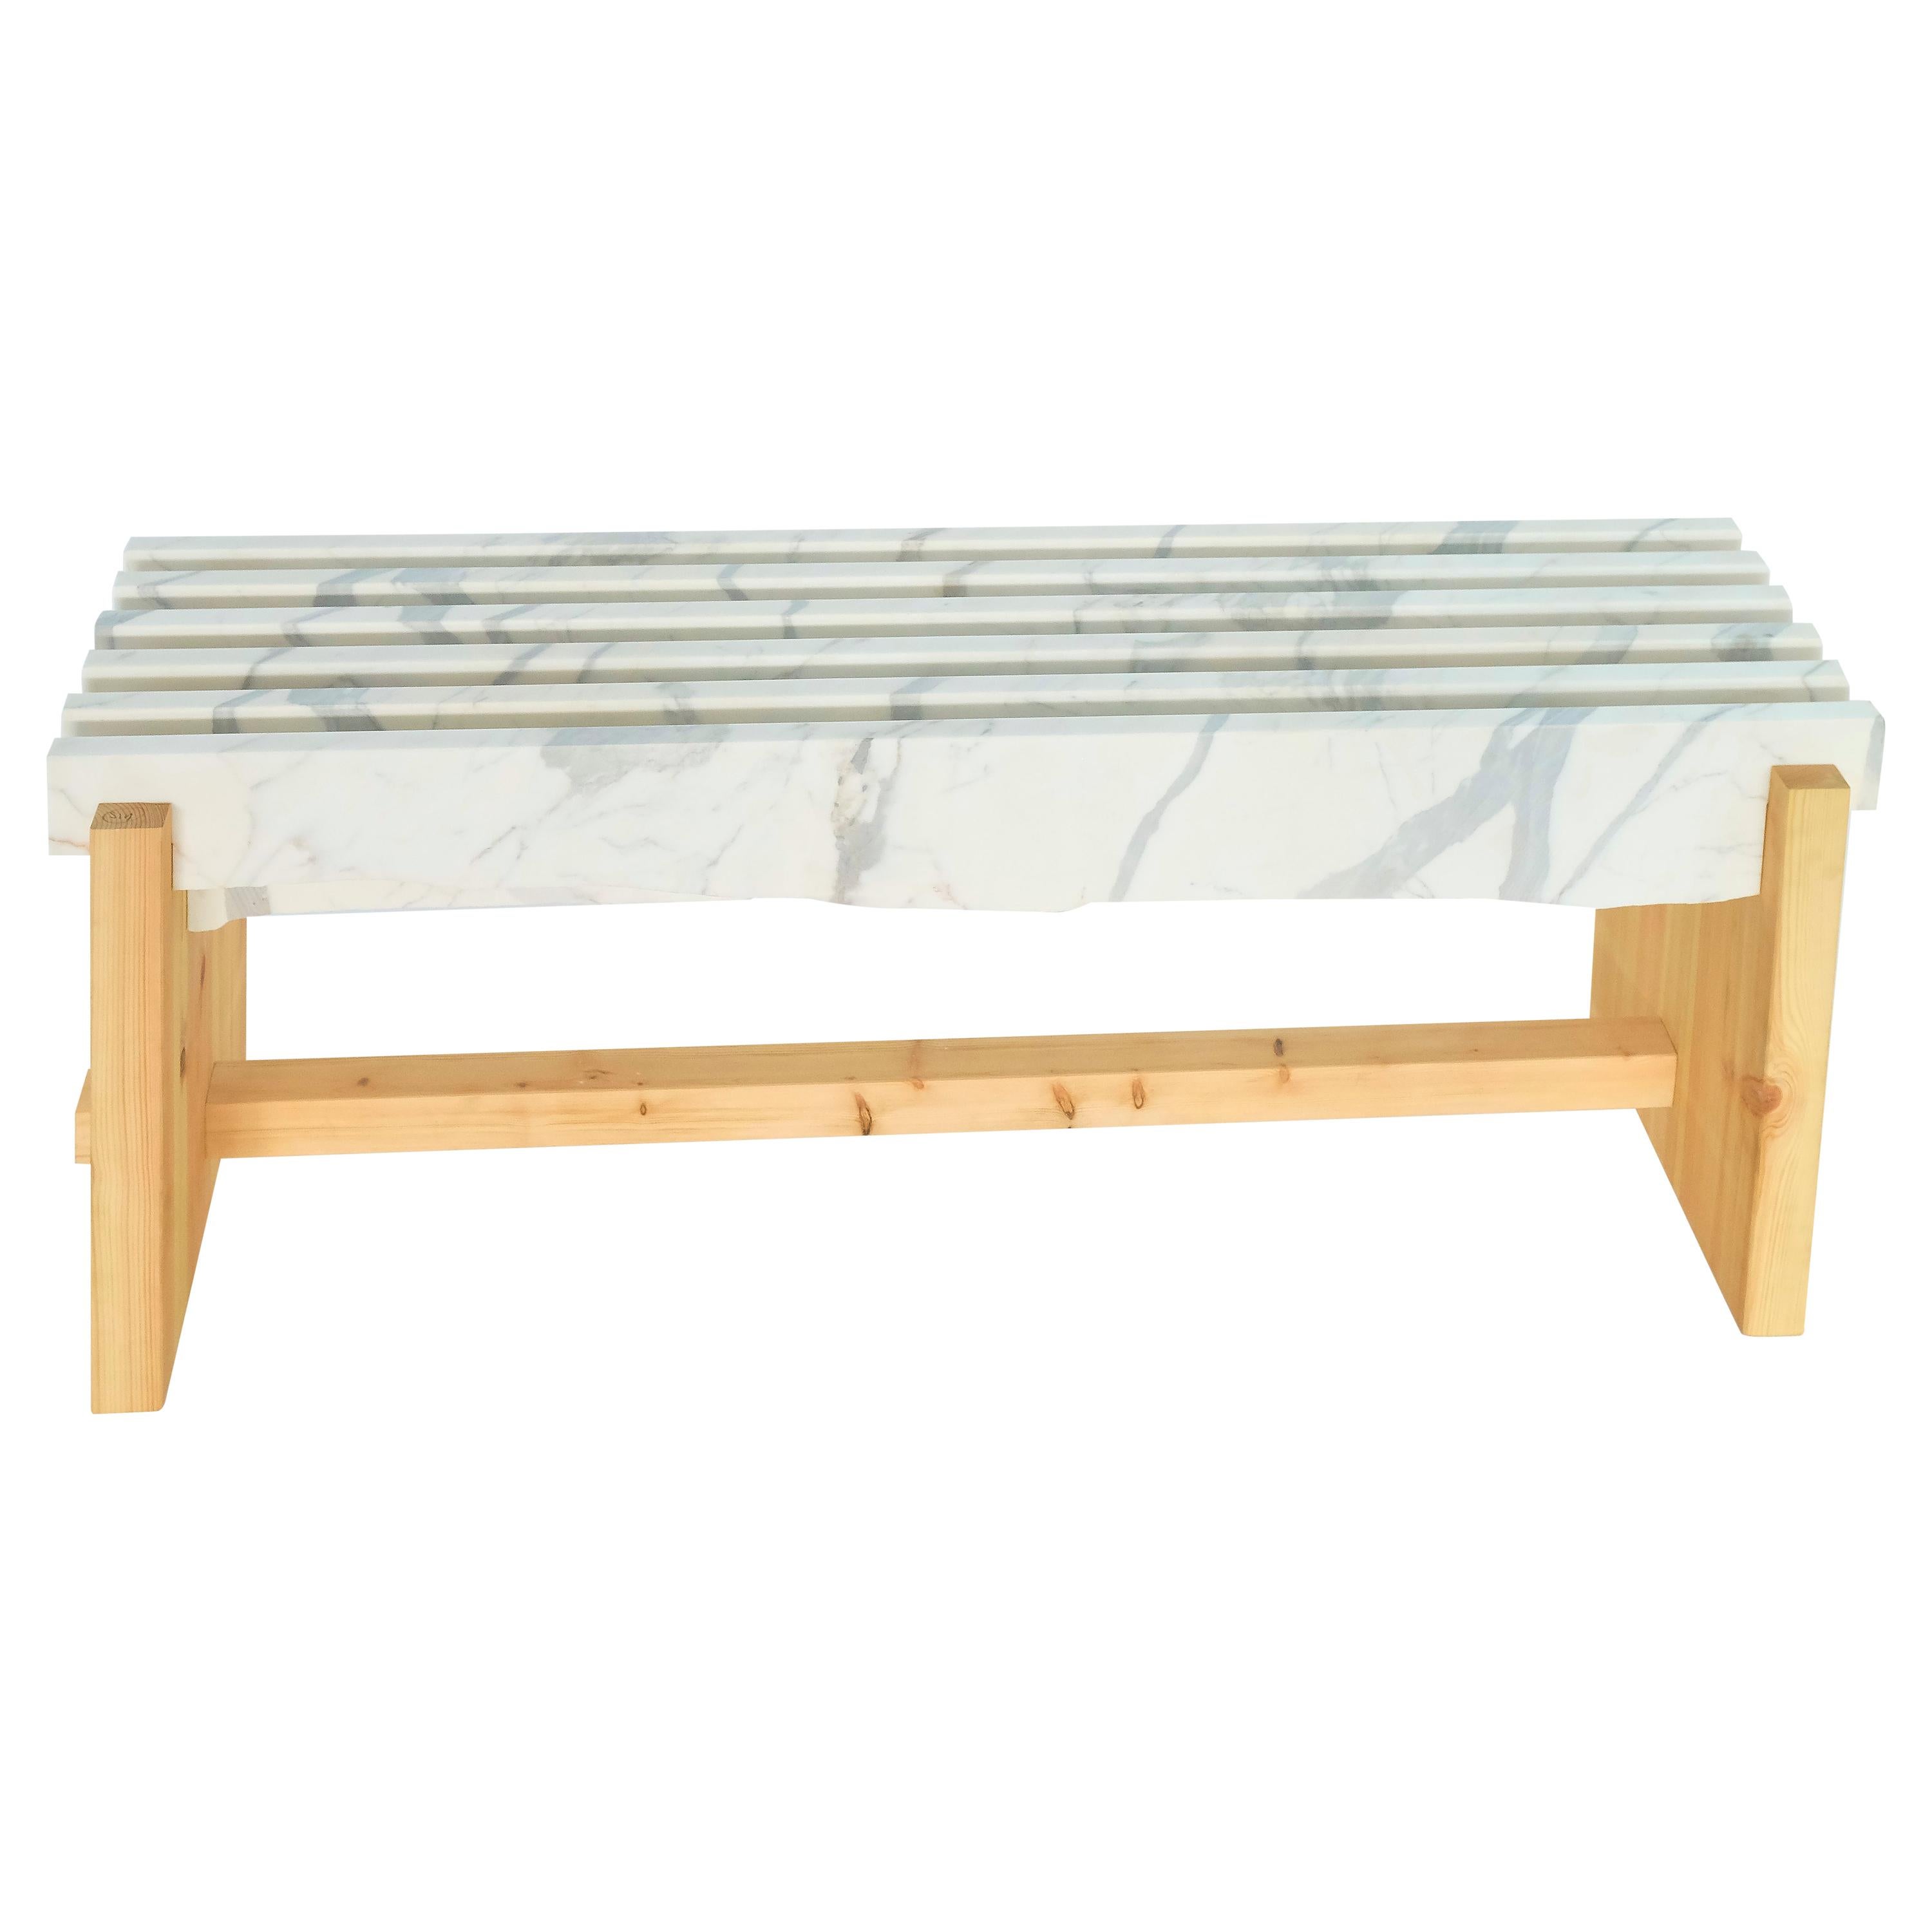 21st Century by Alessandro Gorla "APUANA" Marble & Wood Upcycling Bench